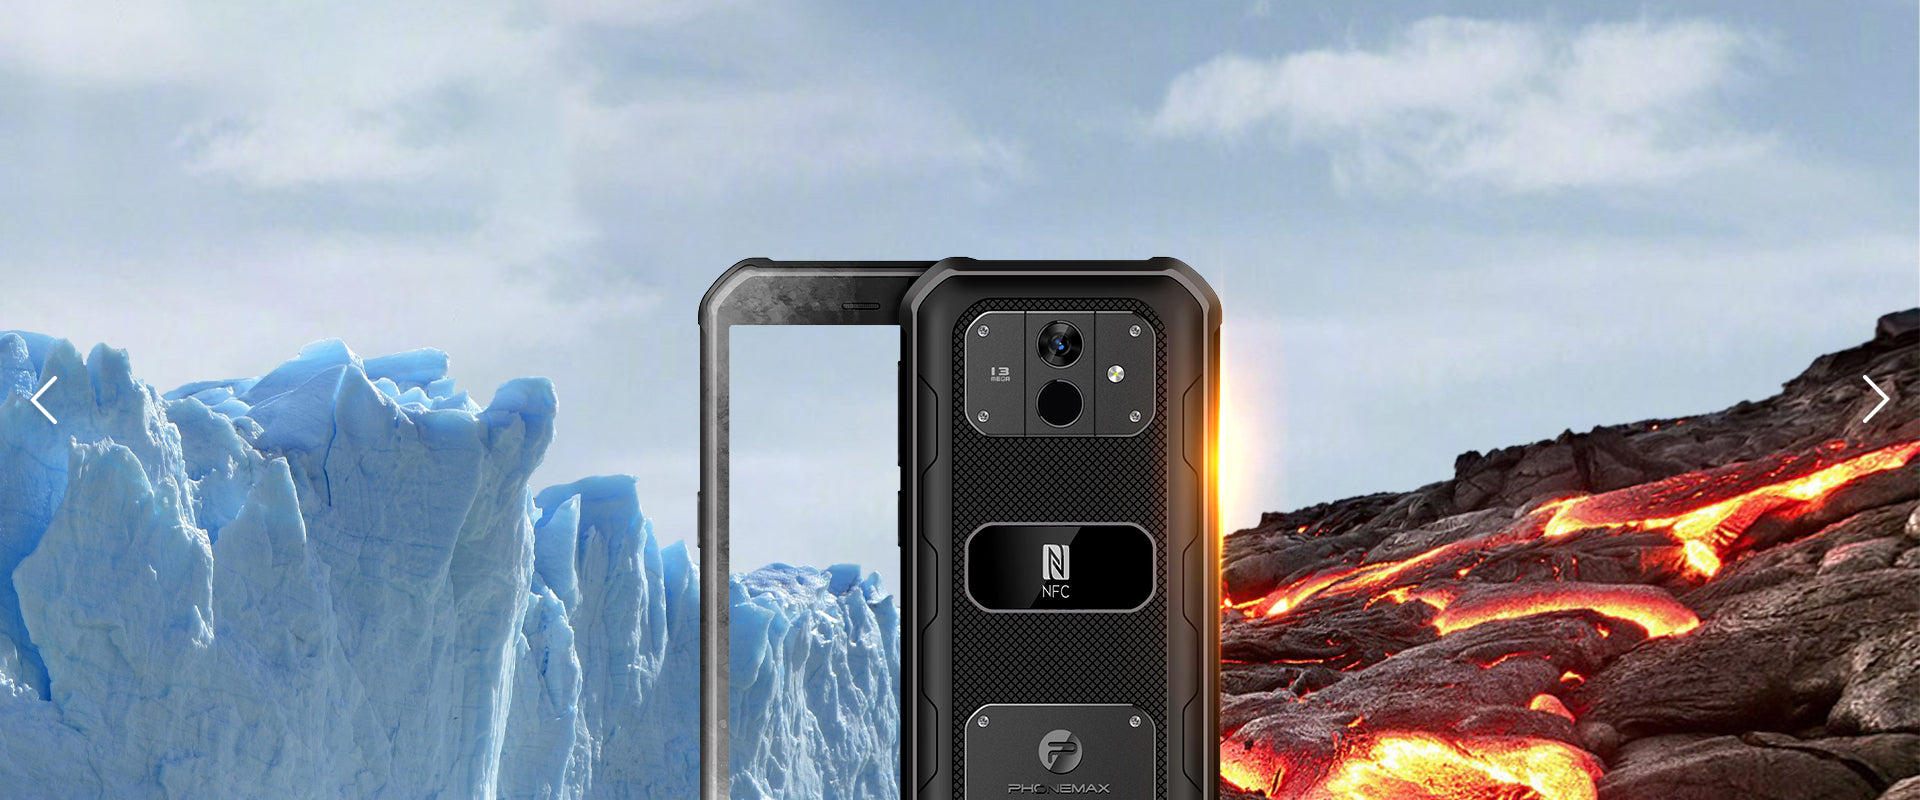 Phonemax Rugged Phone: Advanced Anti-Drop Technology for Extreme Durability